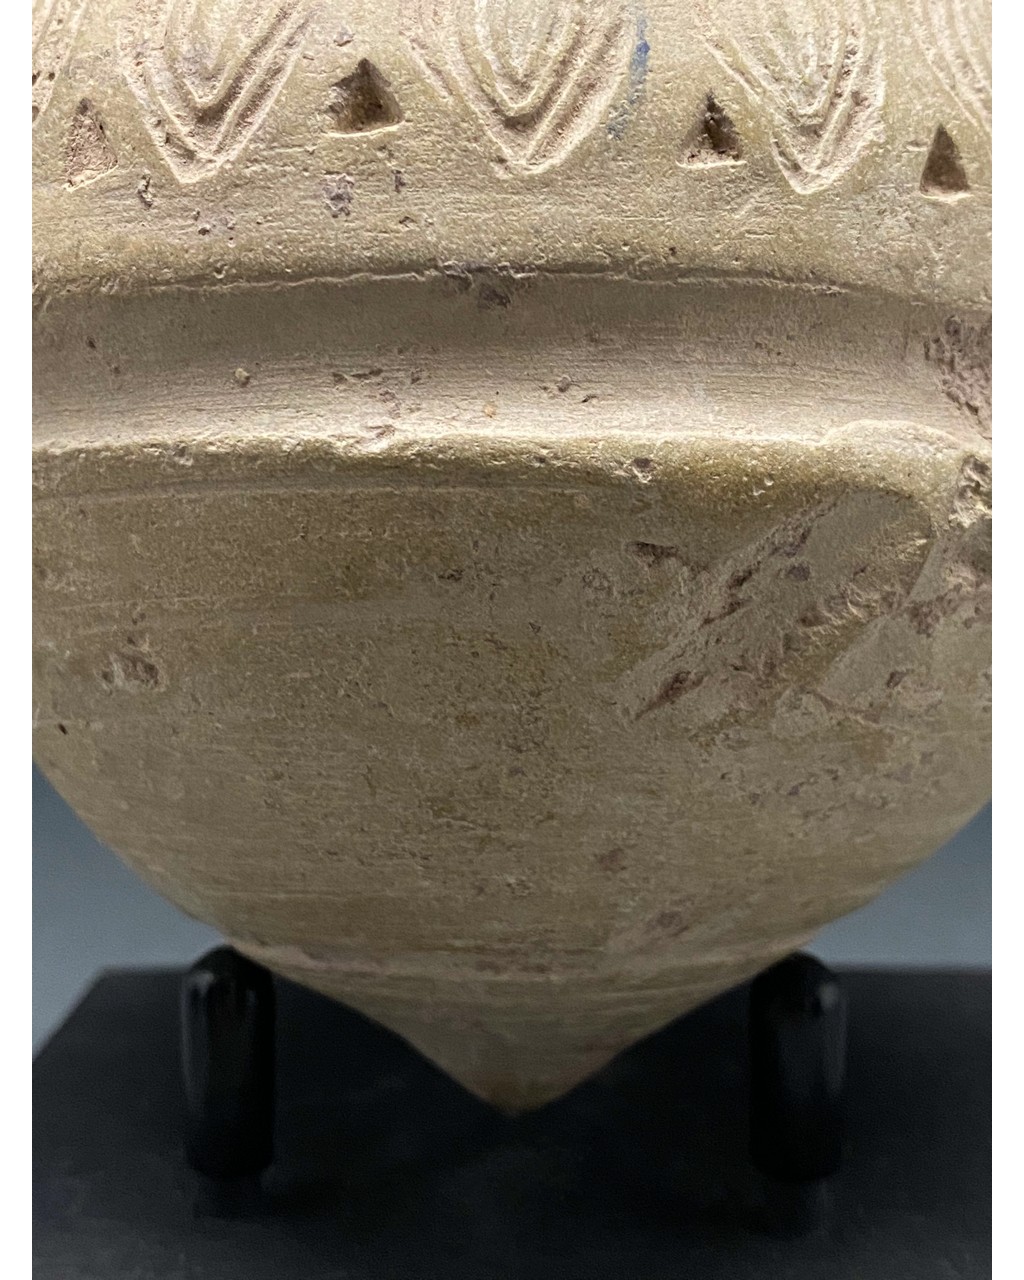 DECORATED BYZANTINE GREEK FIRE GRENADE - Image 4 of 11